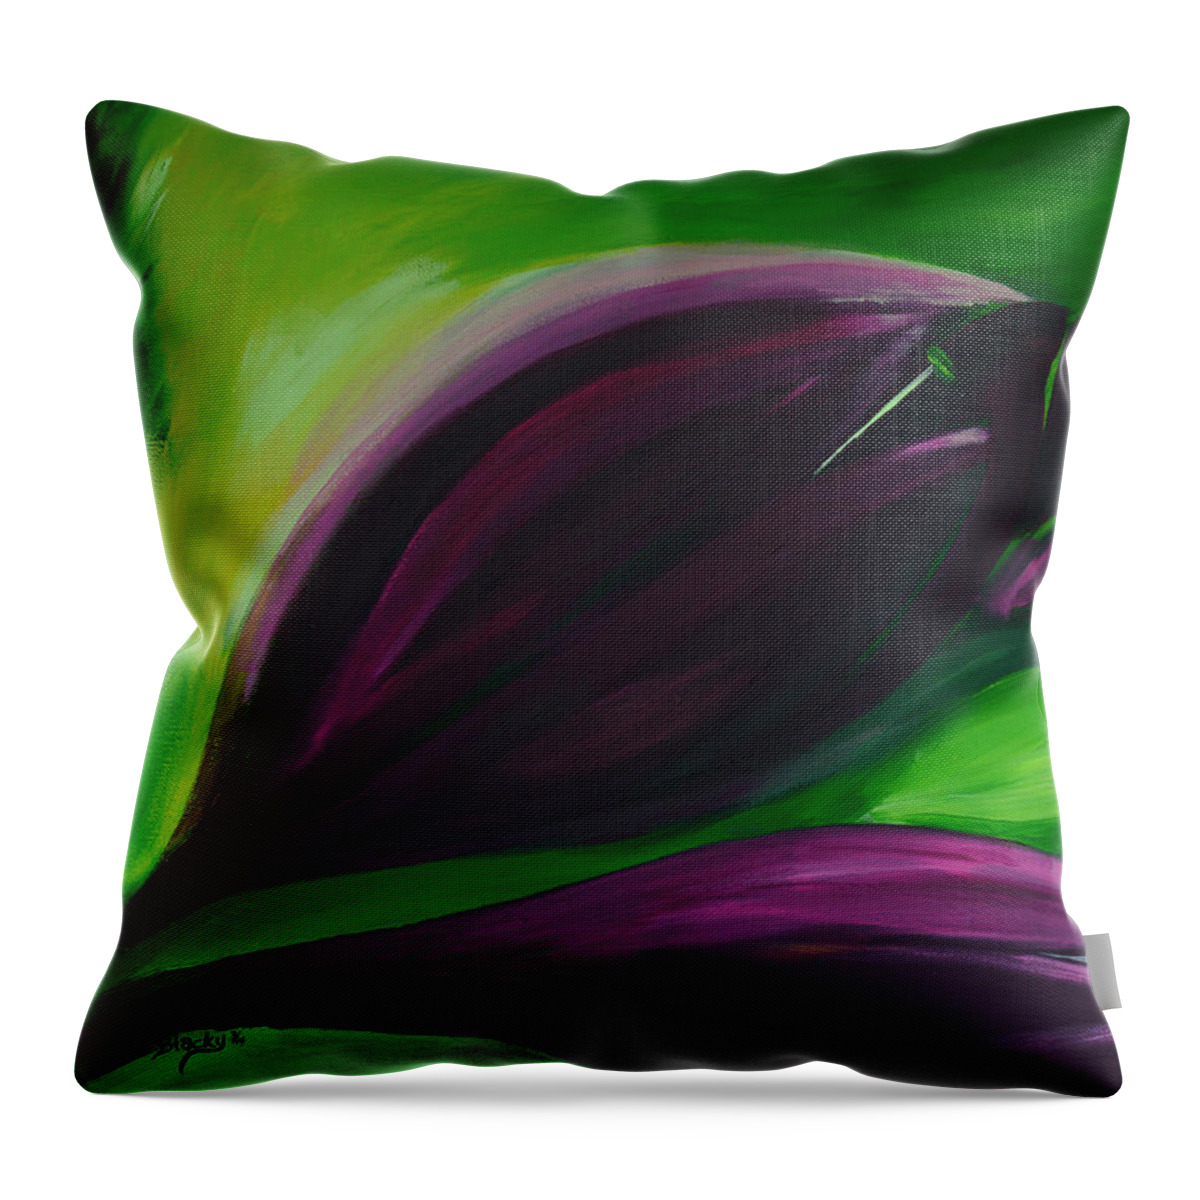 Tulips Throw Pillow featuring the painting Queen Of The Night Tulips by Donna Blackhall